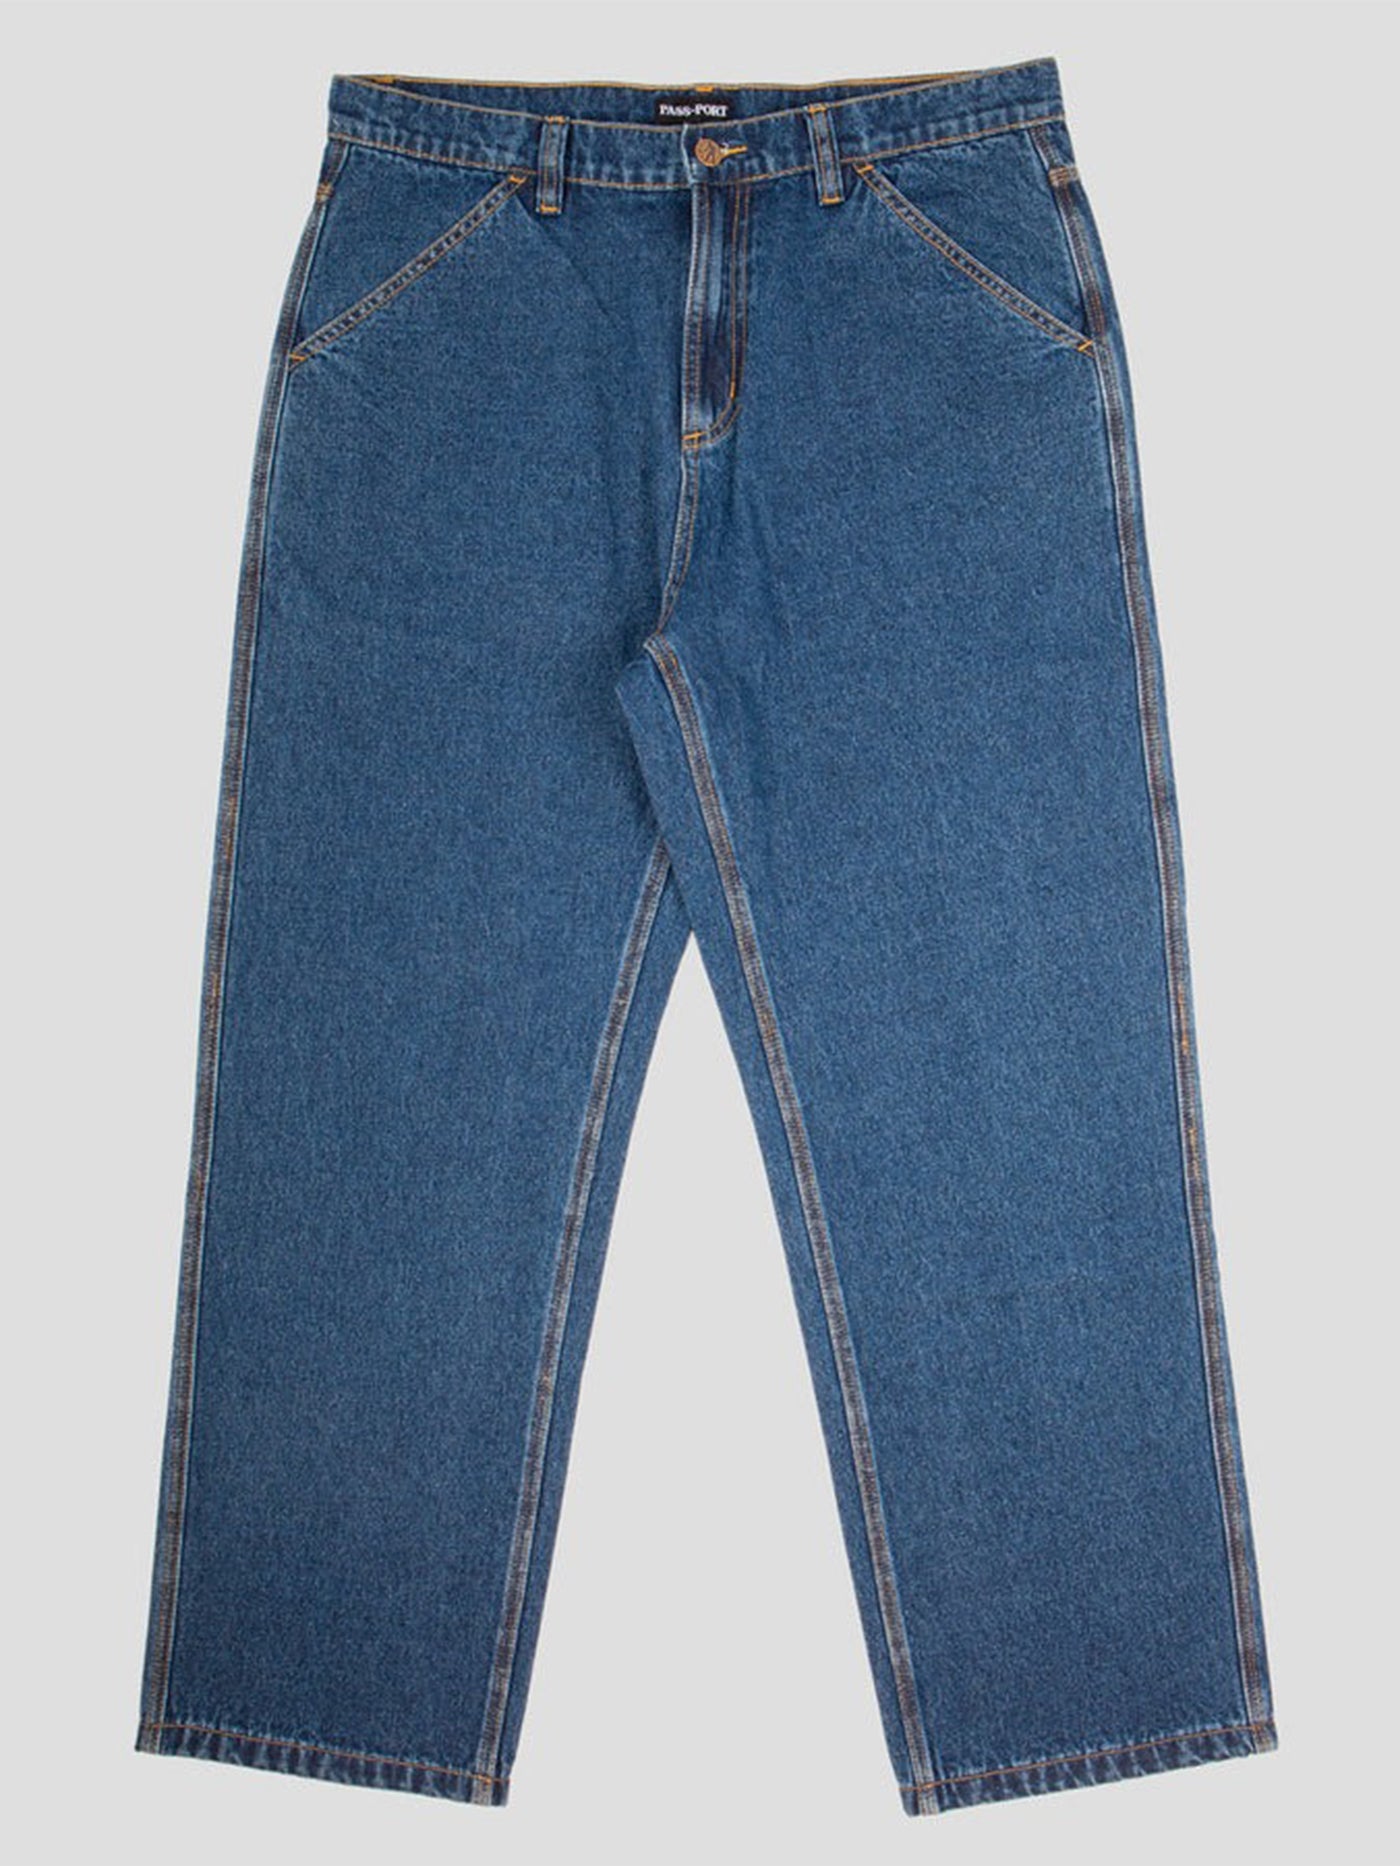 Pass Port Workers Club Jeans Spring 2024